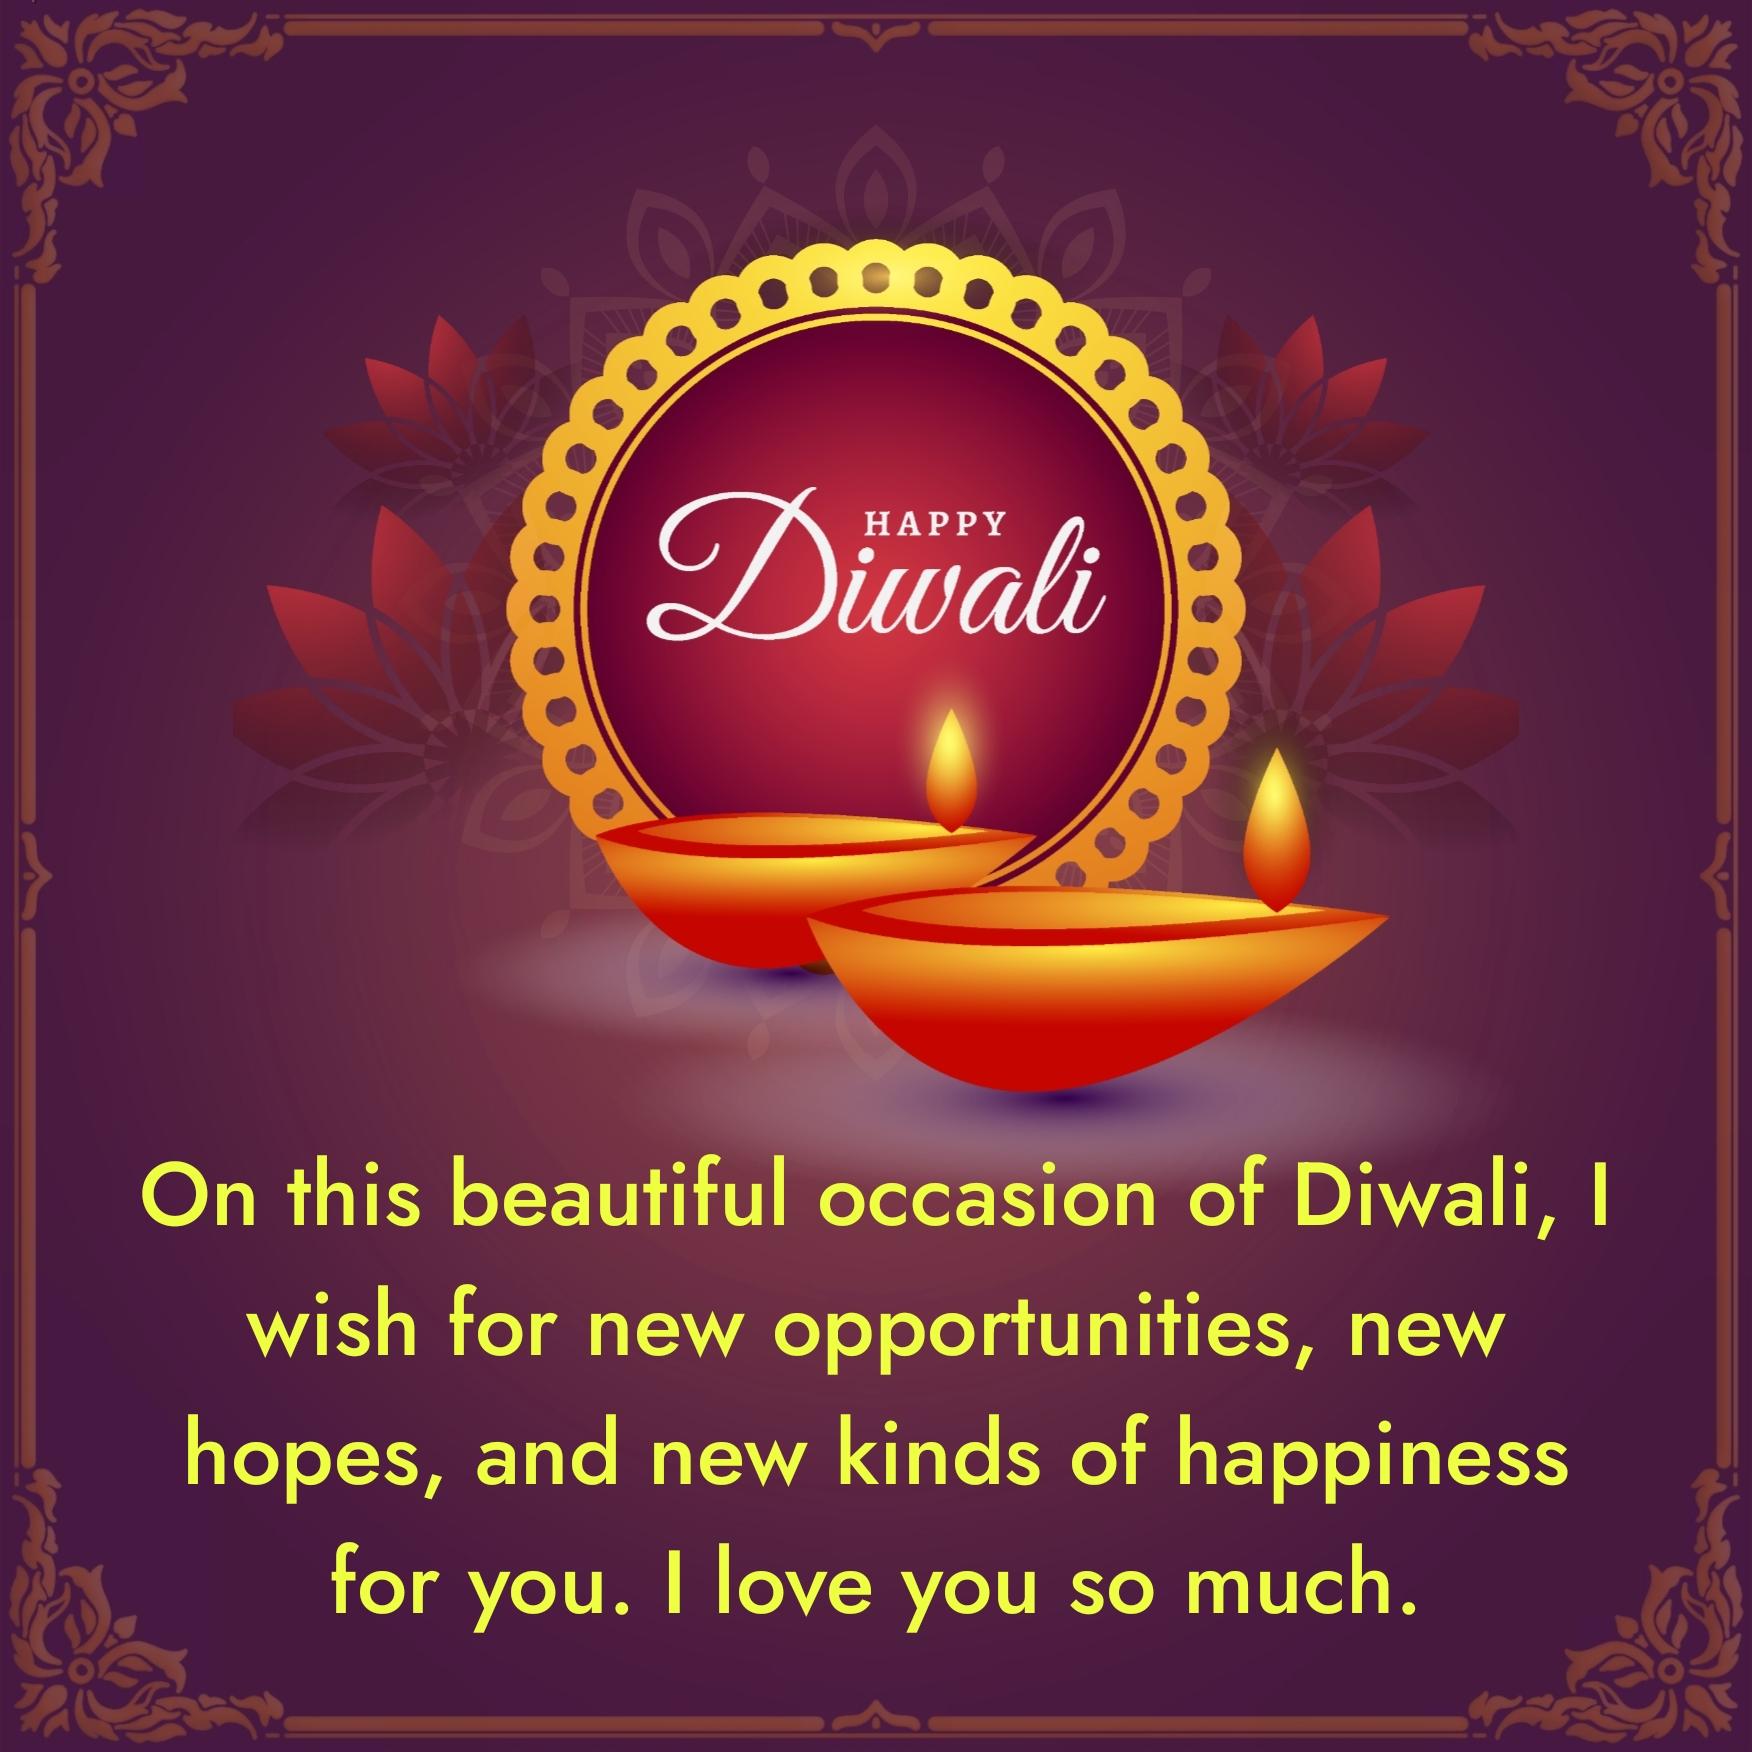 On this beautiful occasion of Diwali I wish for